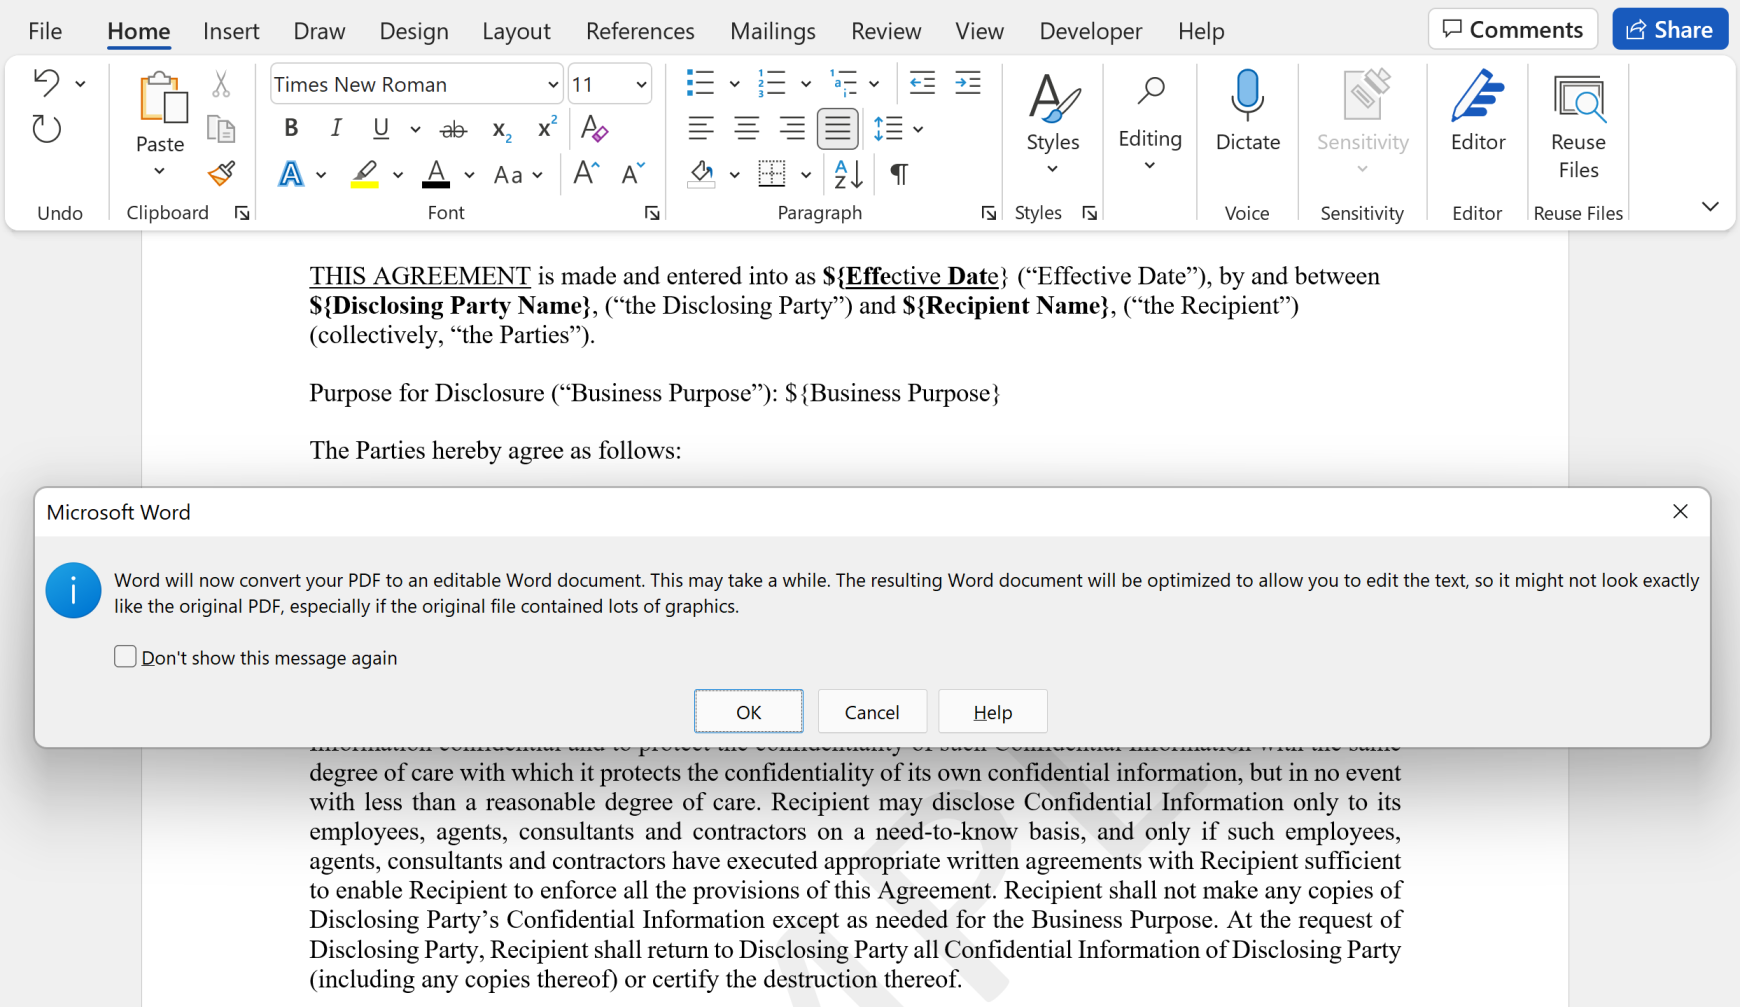 You can automatically convert any PDF into .docx document and edit it in Word.